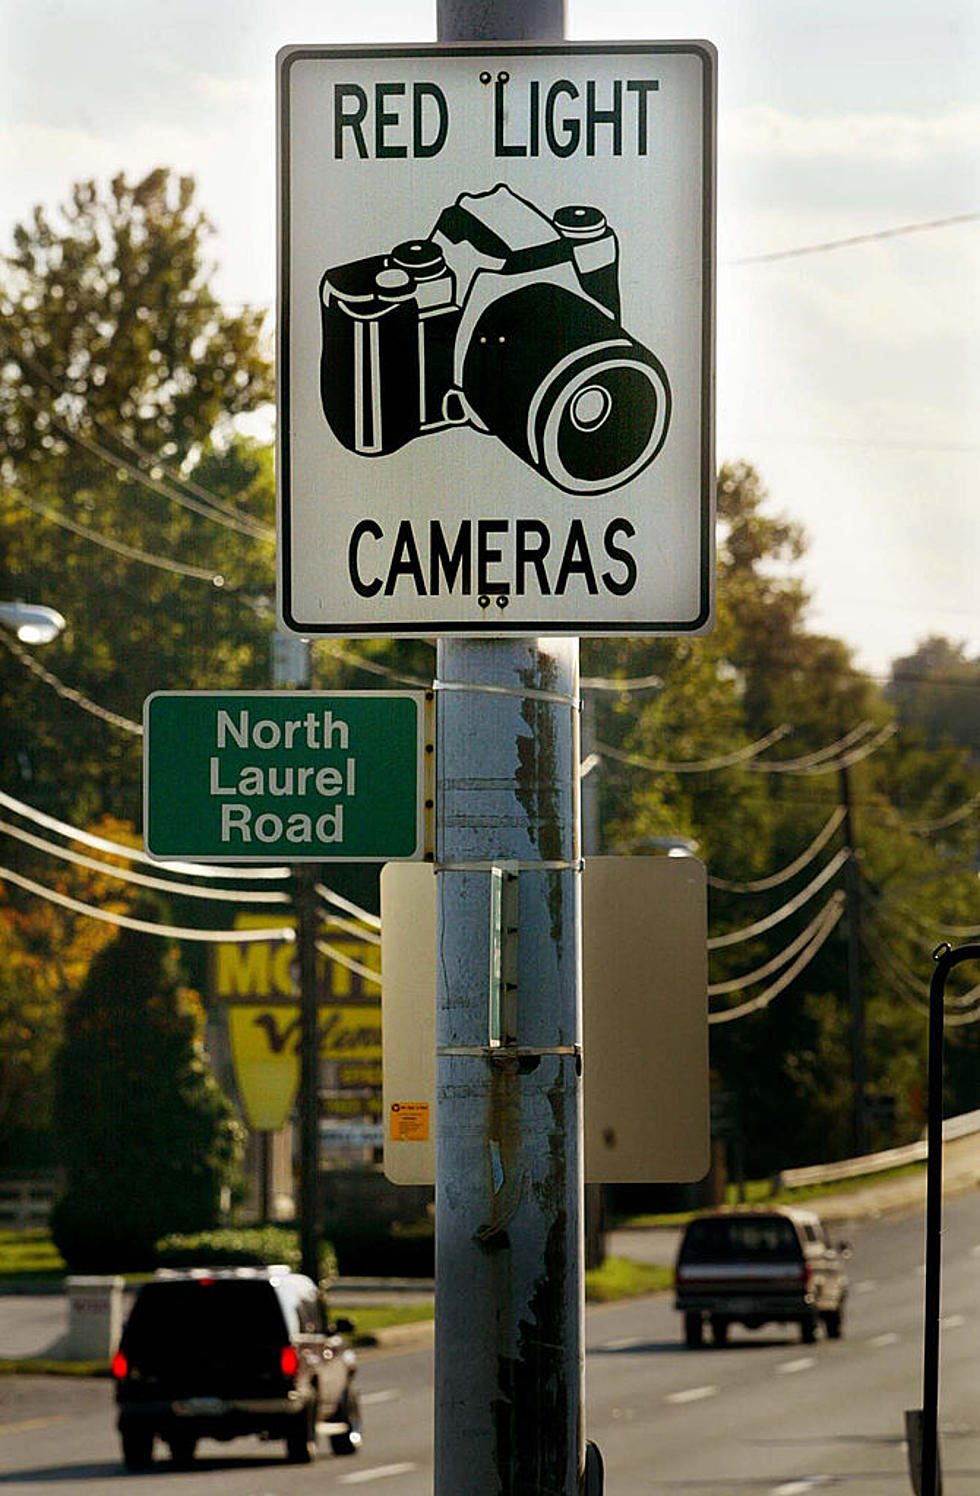 Red Light Cameras Are Illegal in Texas, But Some Cities Still Use